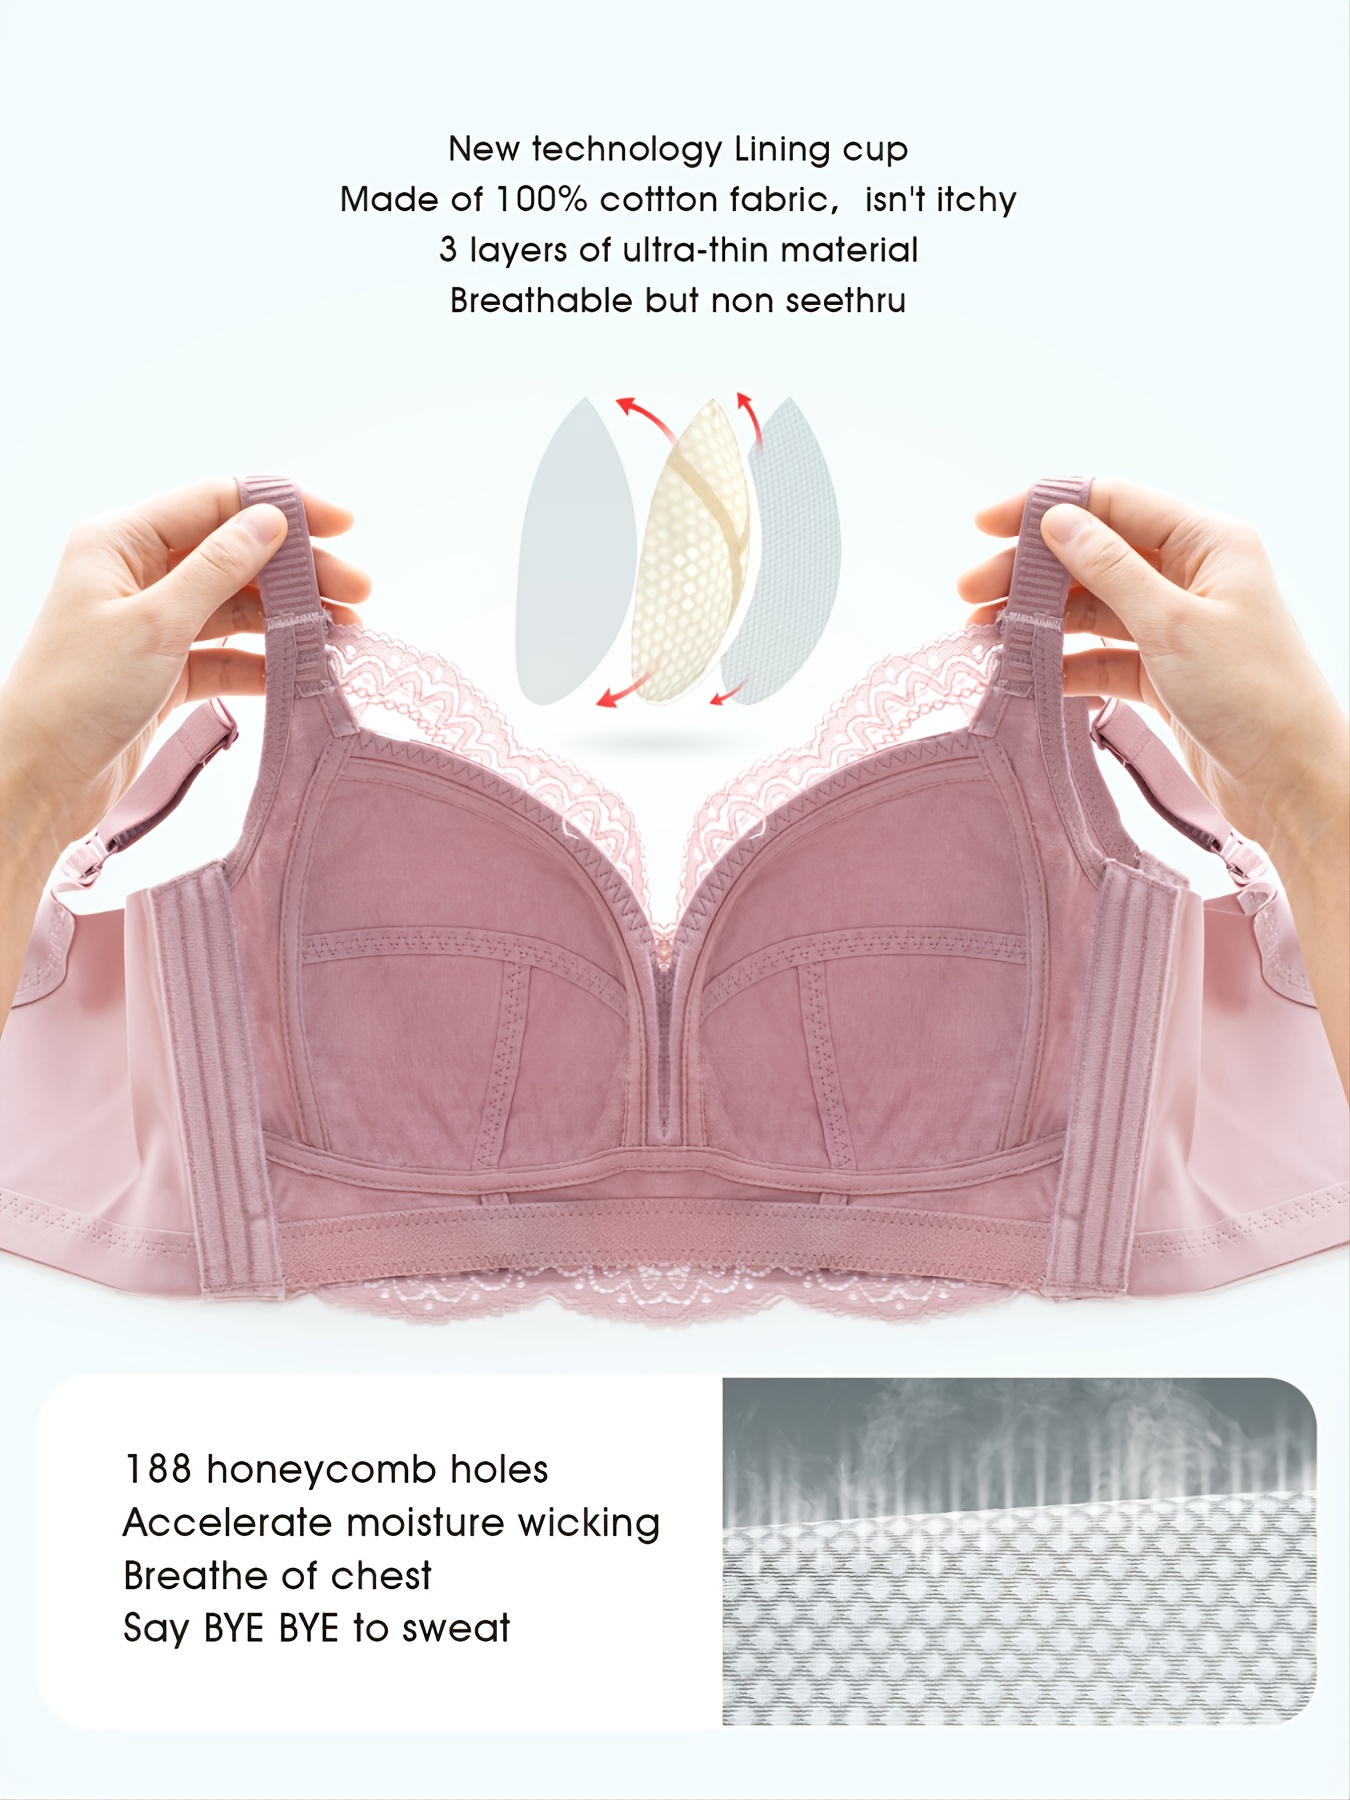 Buy Supportz Non-Padded Non-Wired Colorblocked Full Coverage Bra